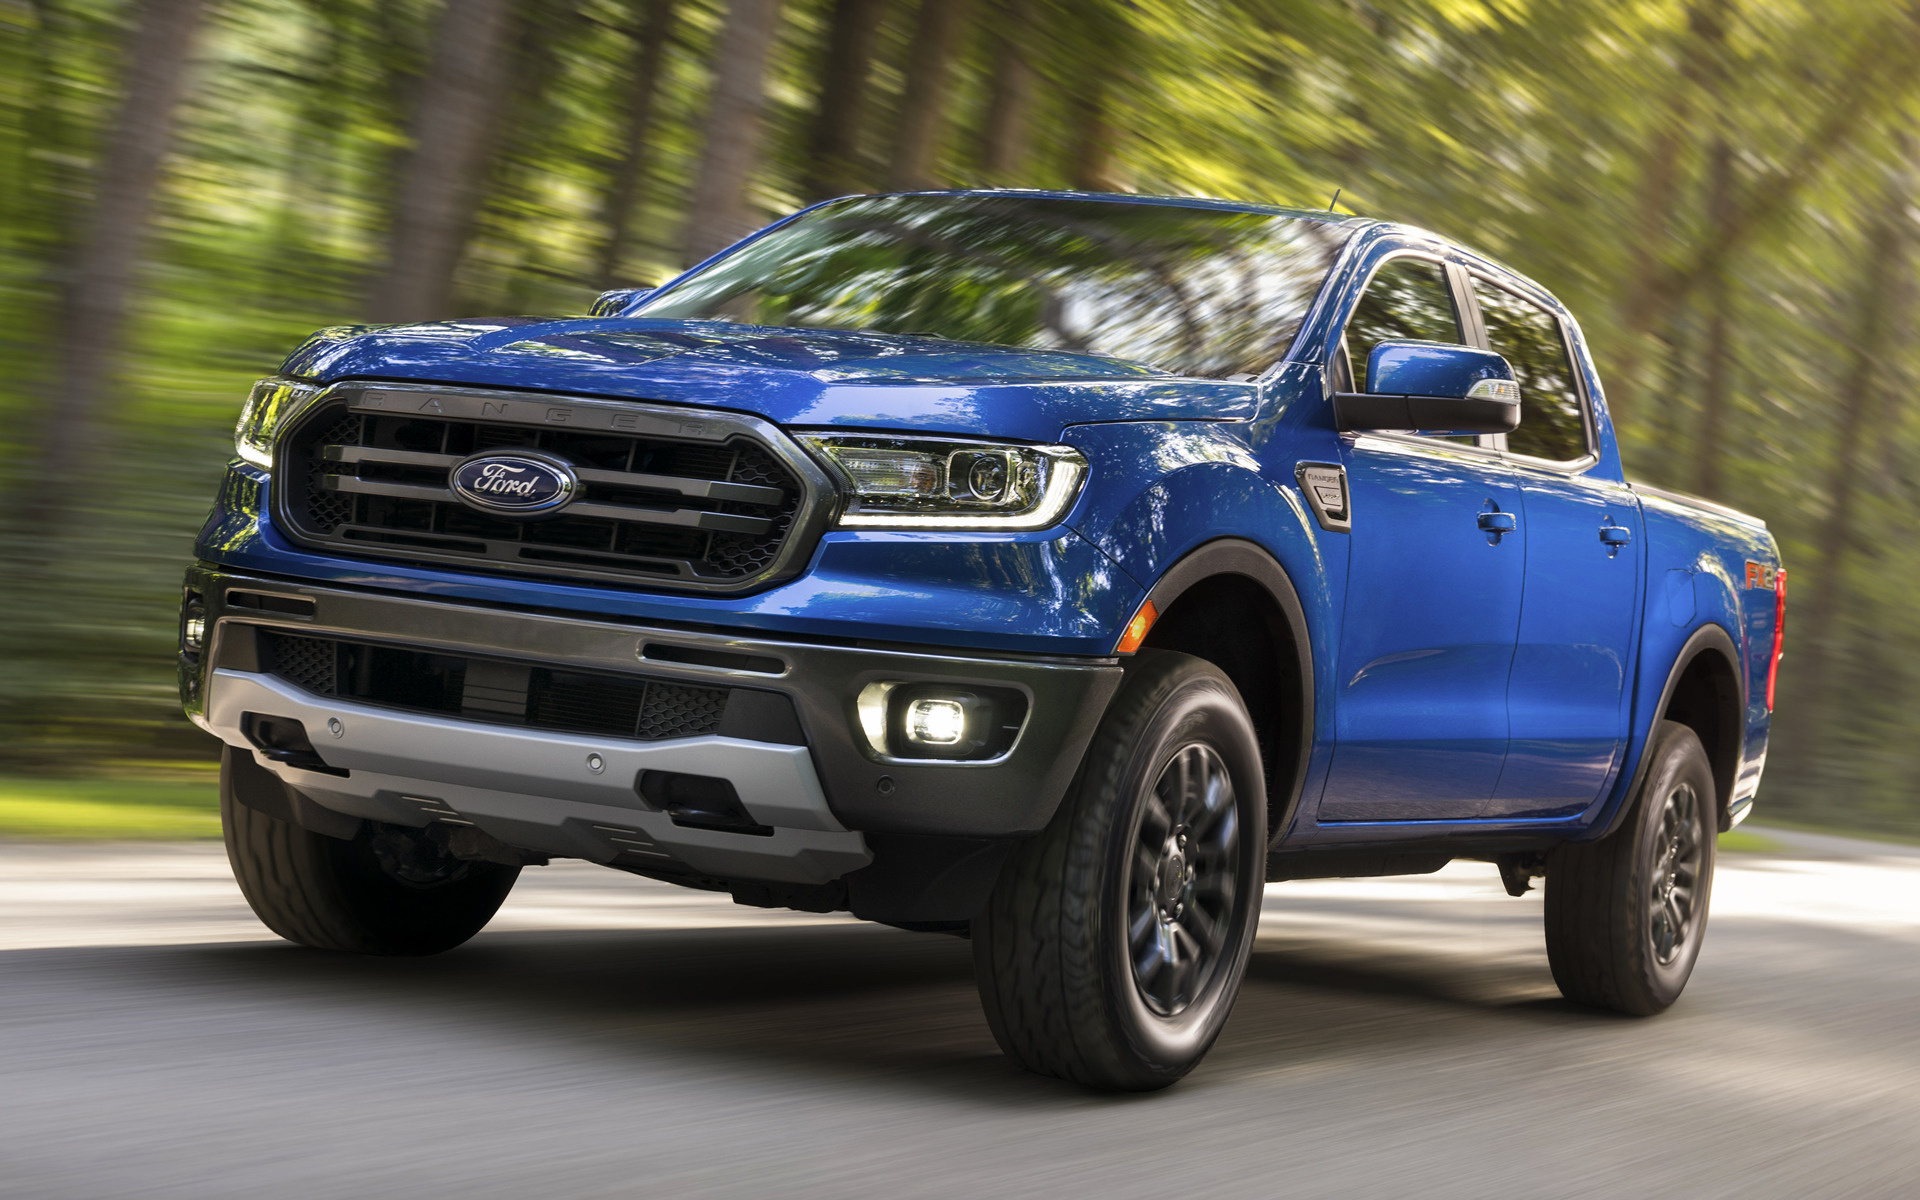 2022 Ford Ranger FX2 SuperCrew US Wallpapers and HD 